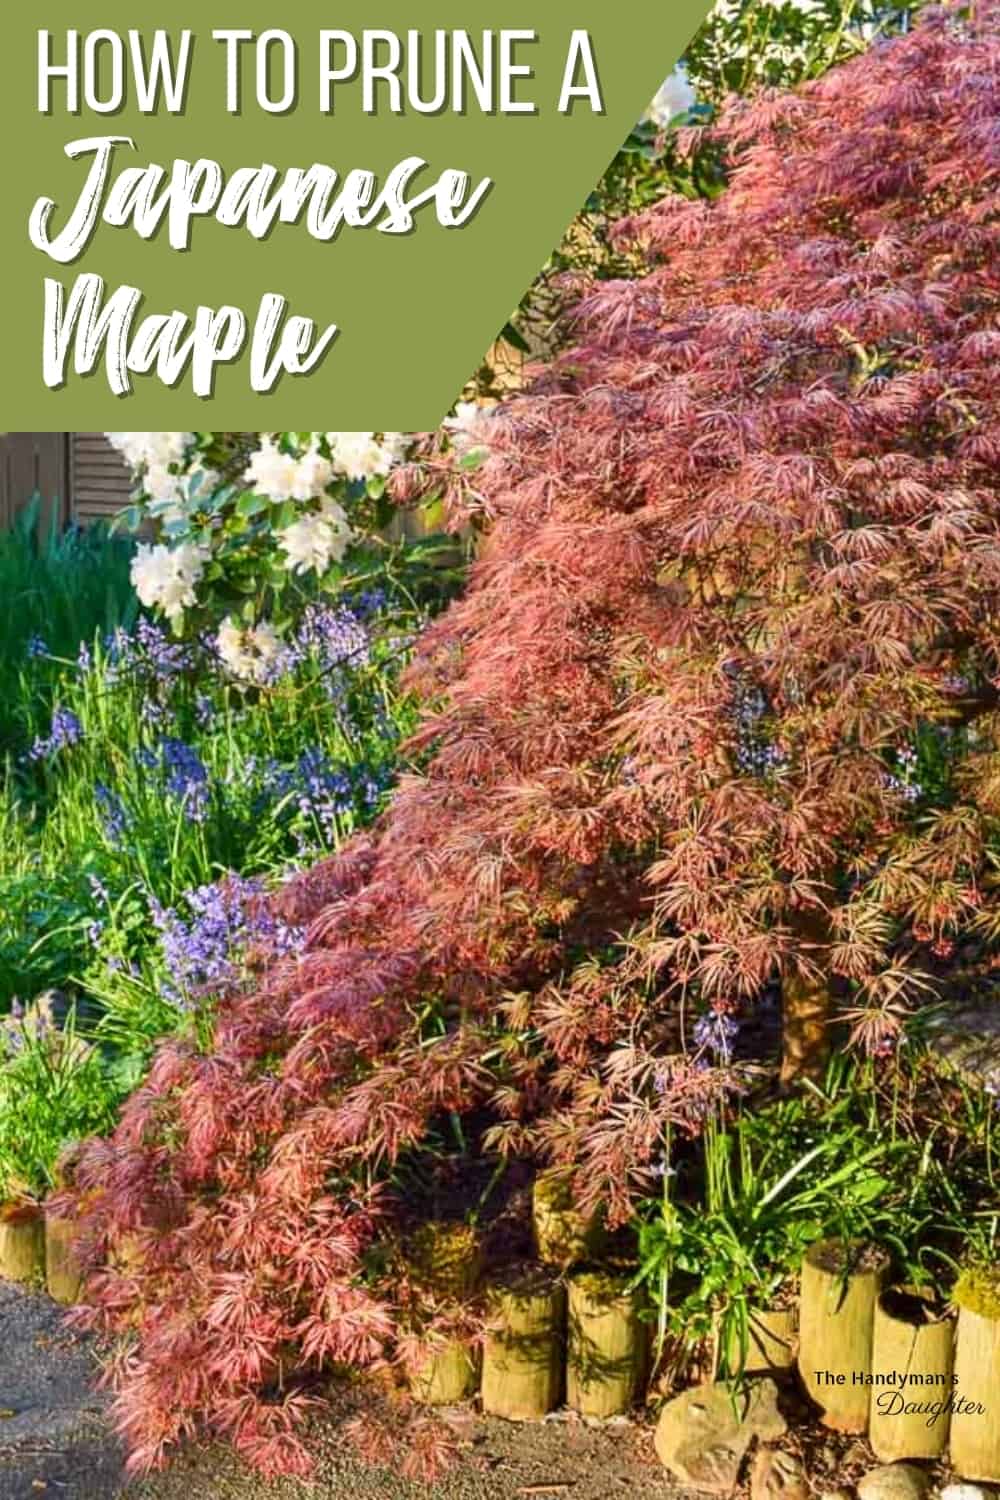 How to Prune a Japanese Maple